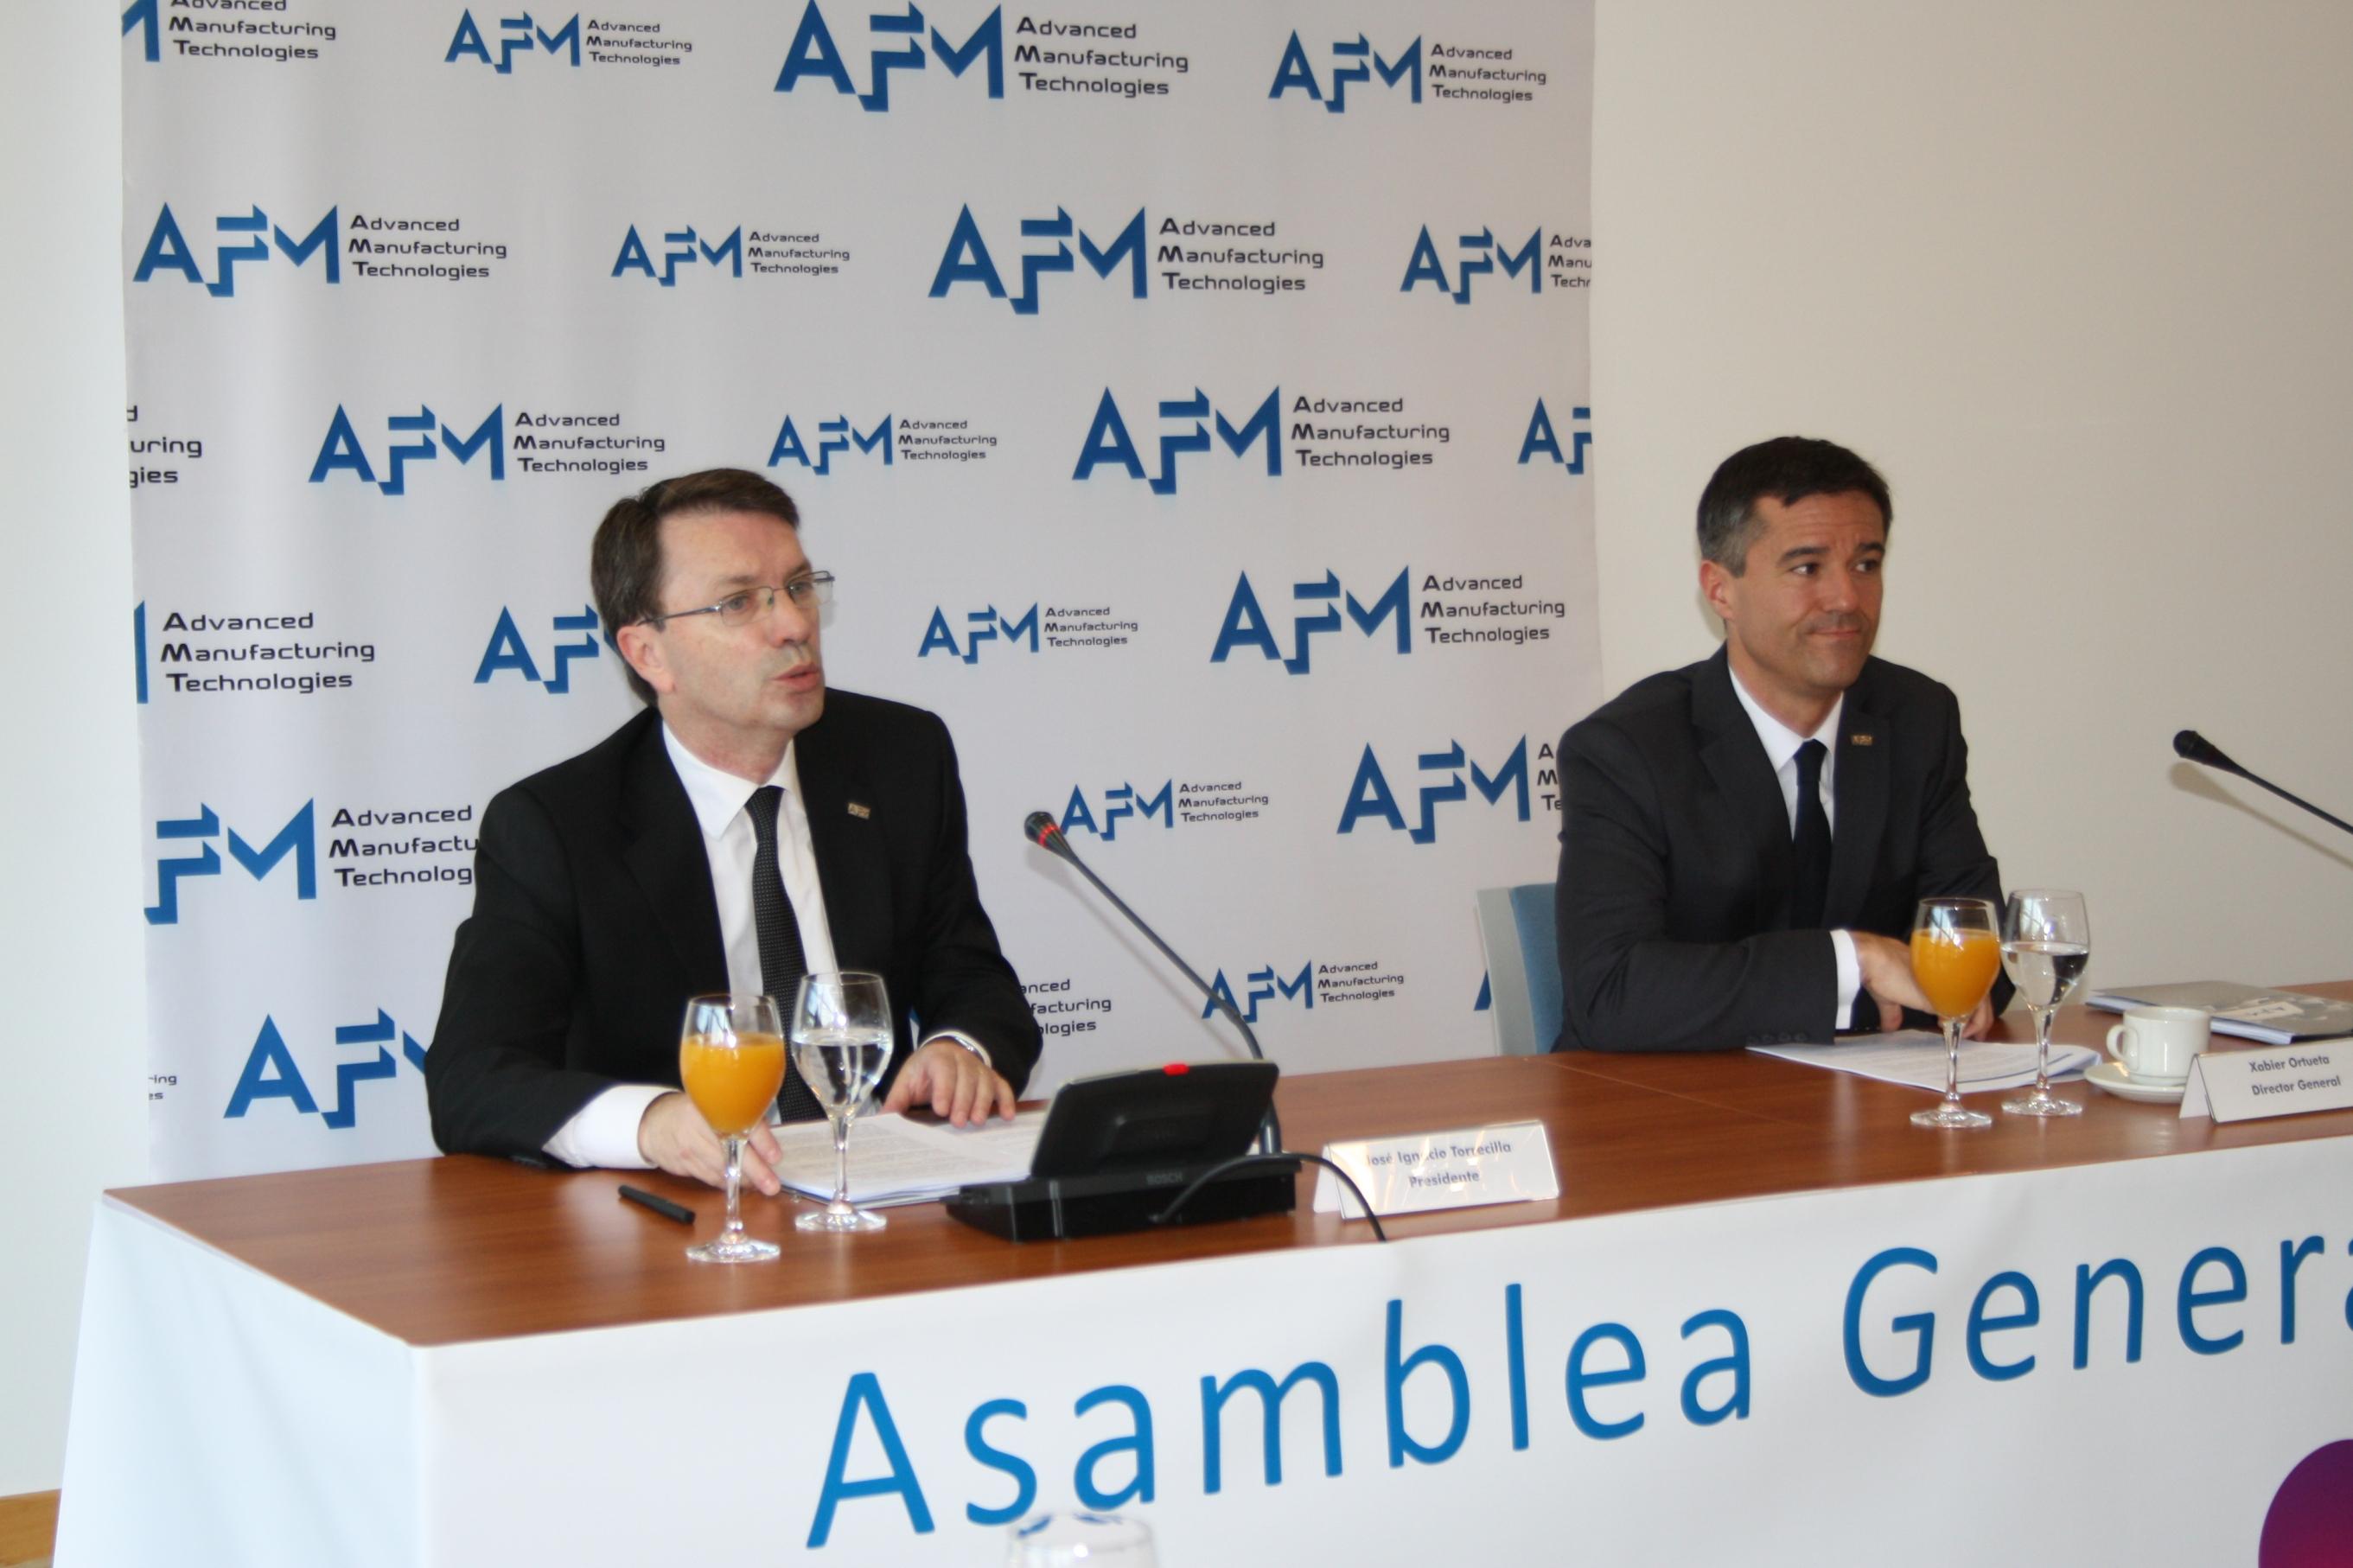  THE BIEMH - SPANISH MACHINE TOOL BIENNIAL, THE BEGINNING OF THE RECOVERY